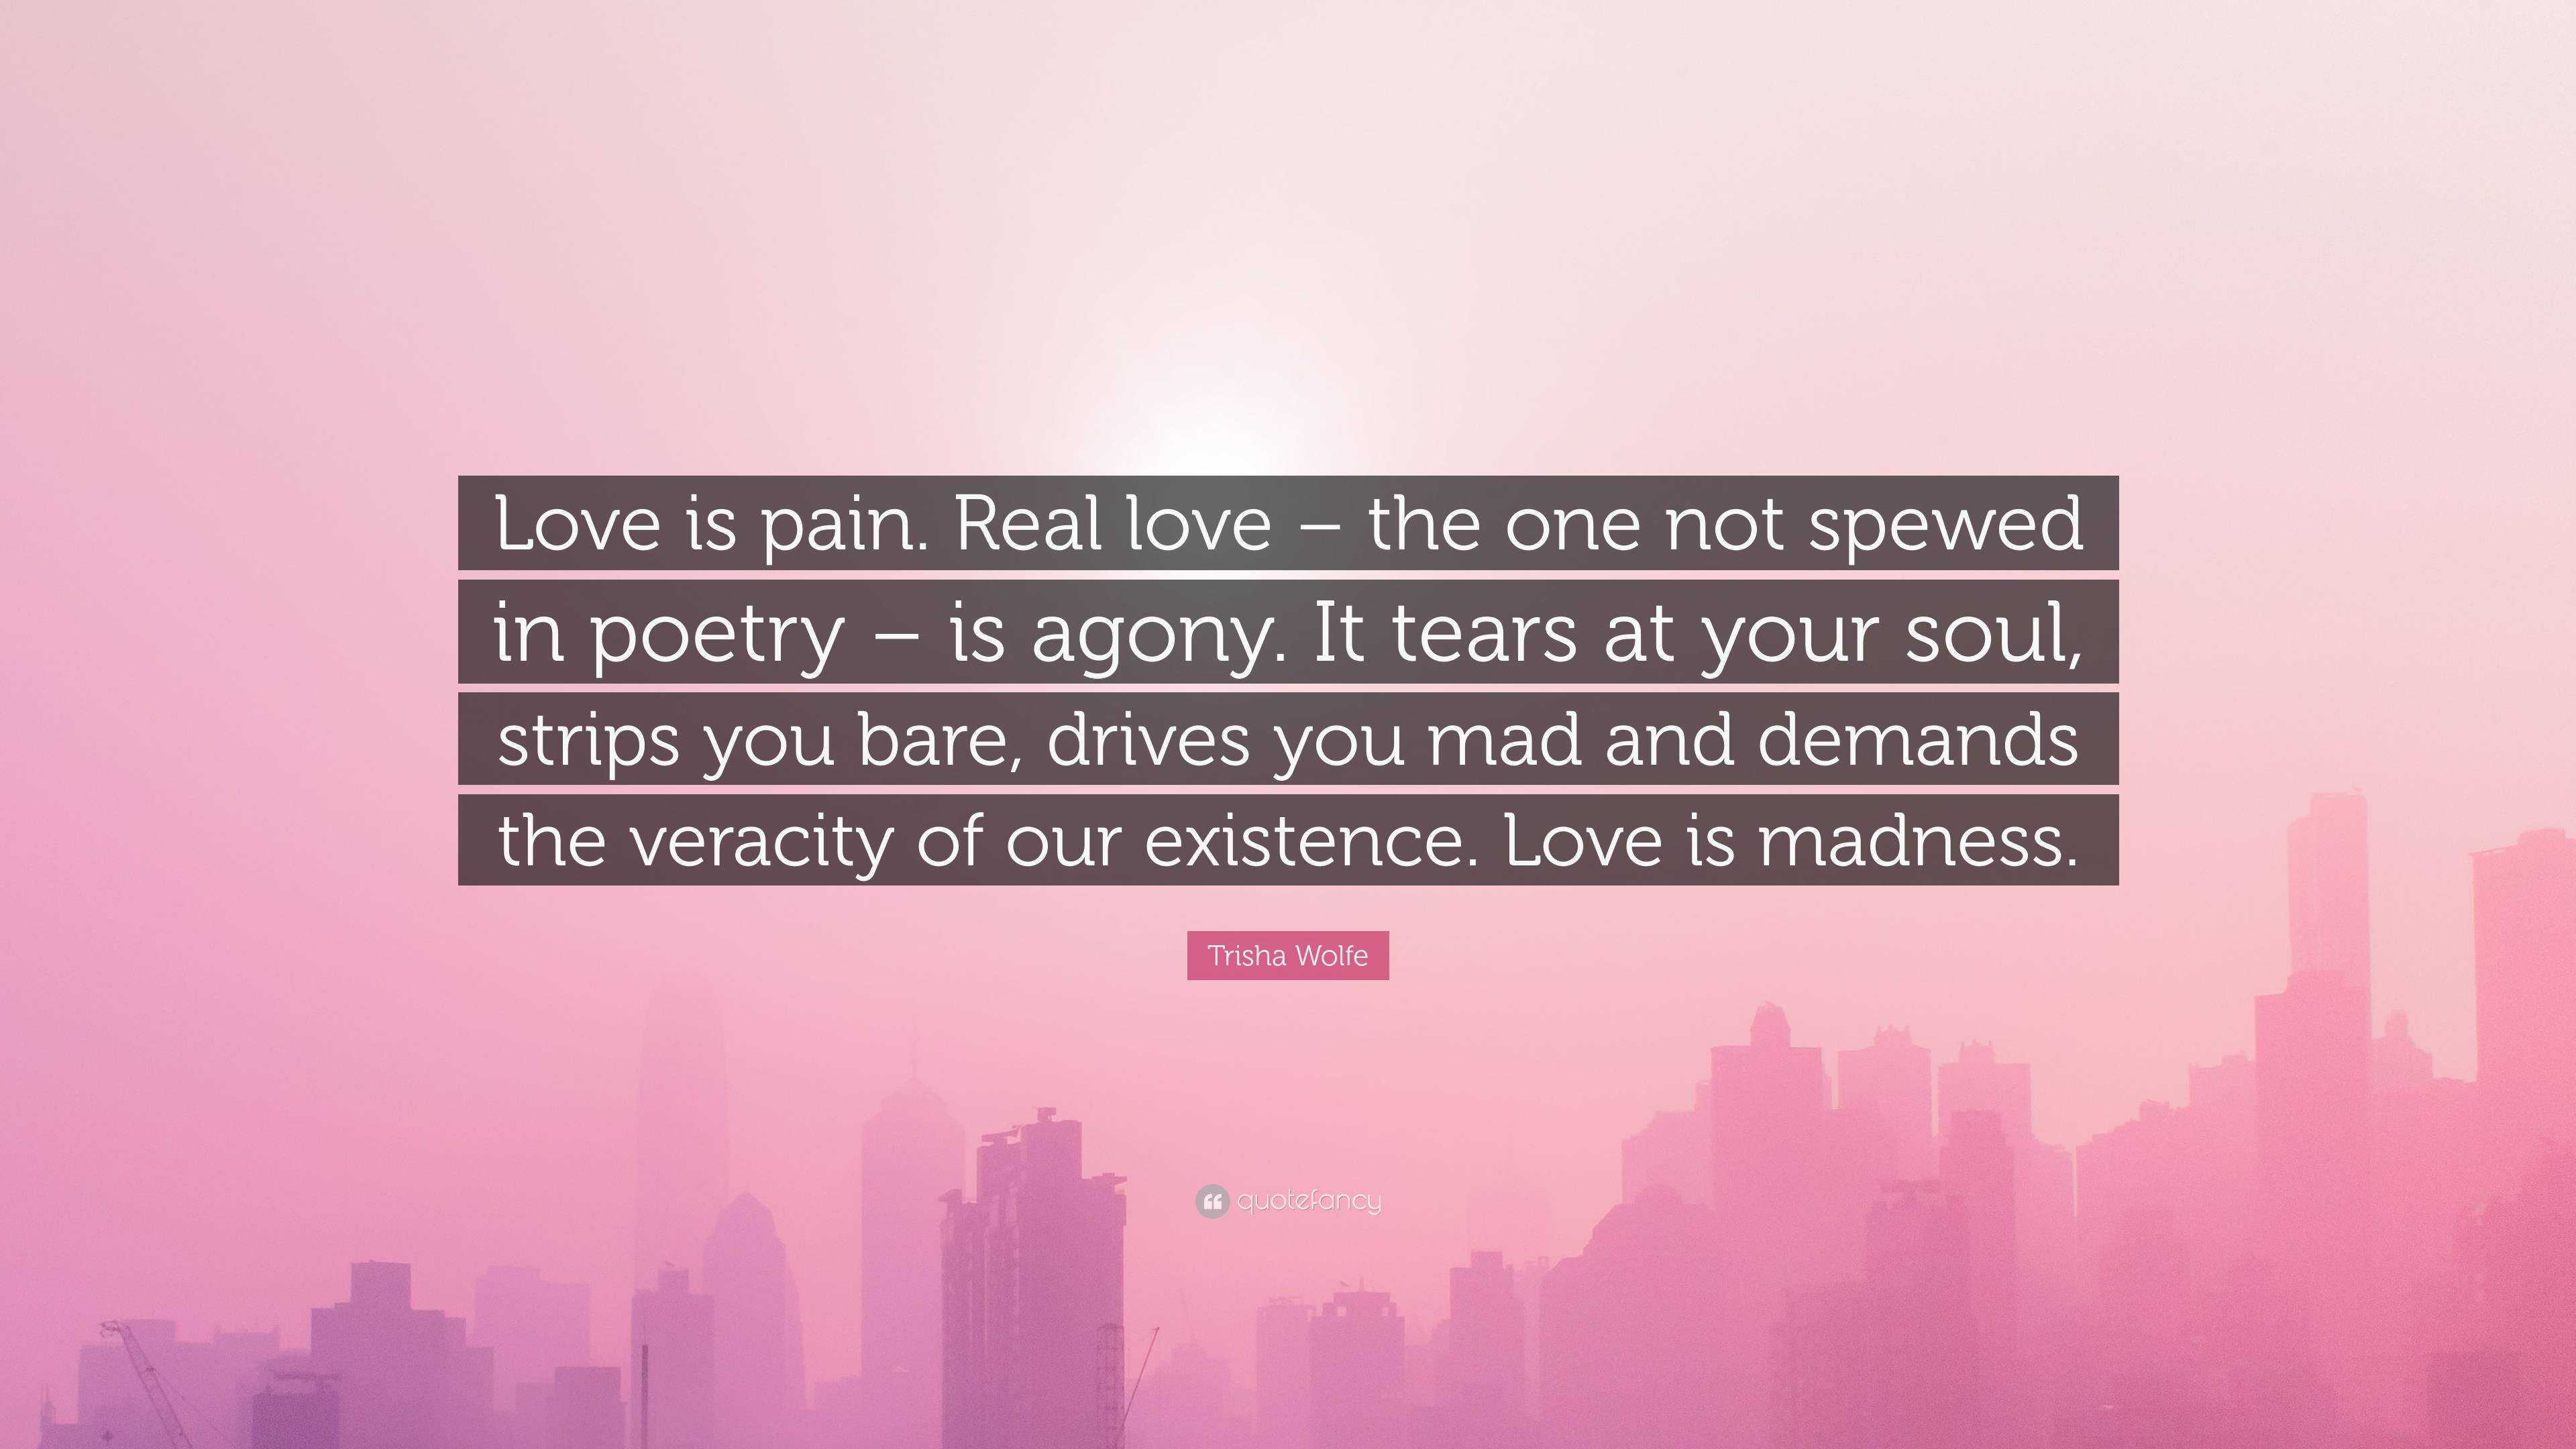 Trisha Wolfe Quote: “Love is pain. Real love – the one not spewed